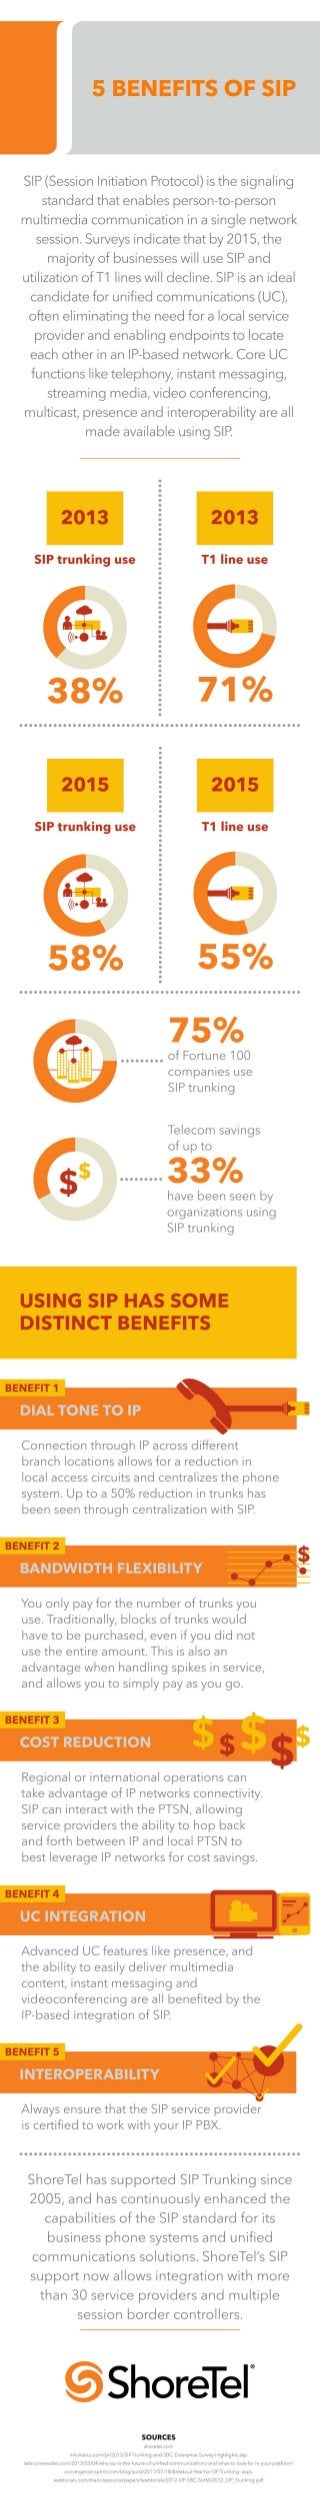 Benefits of SIP | Voyager Networks